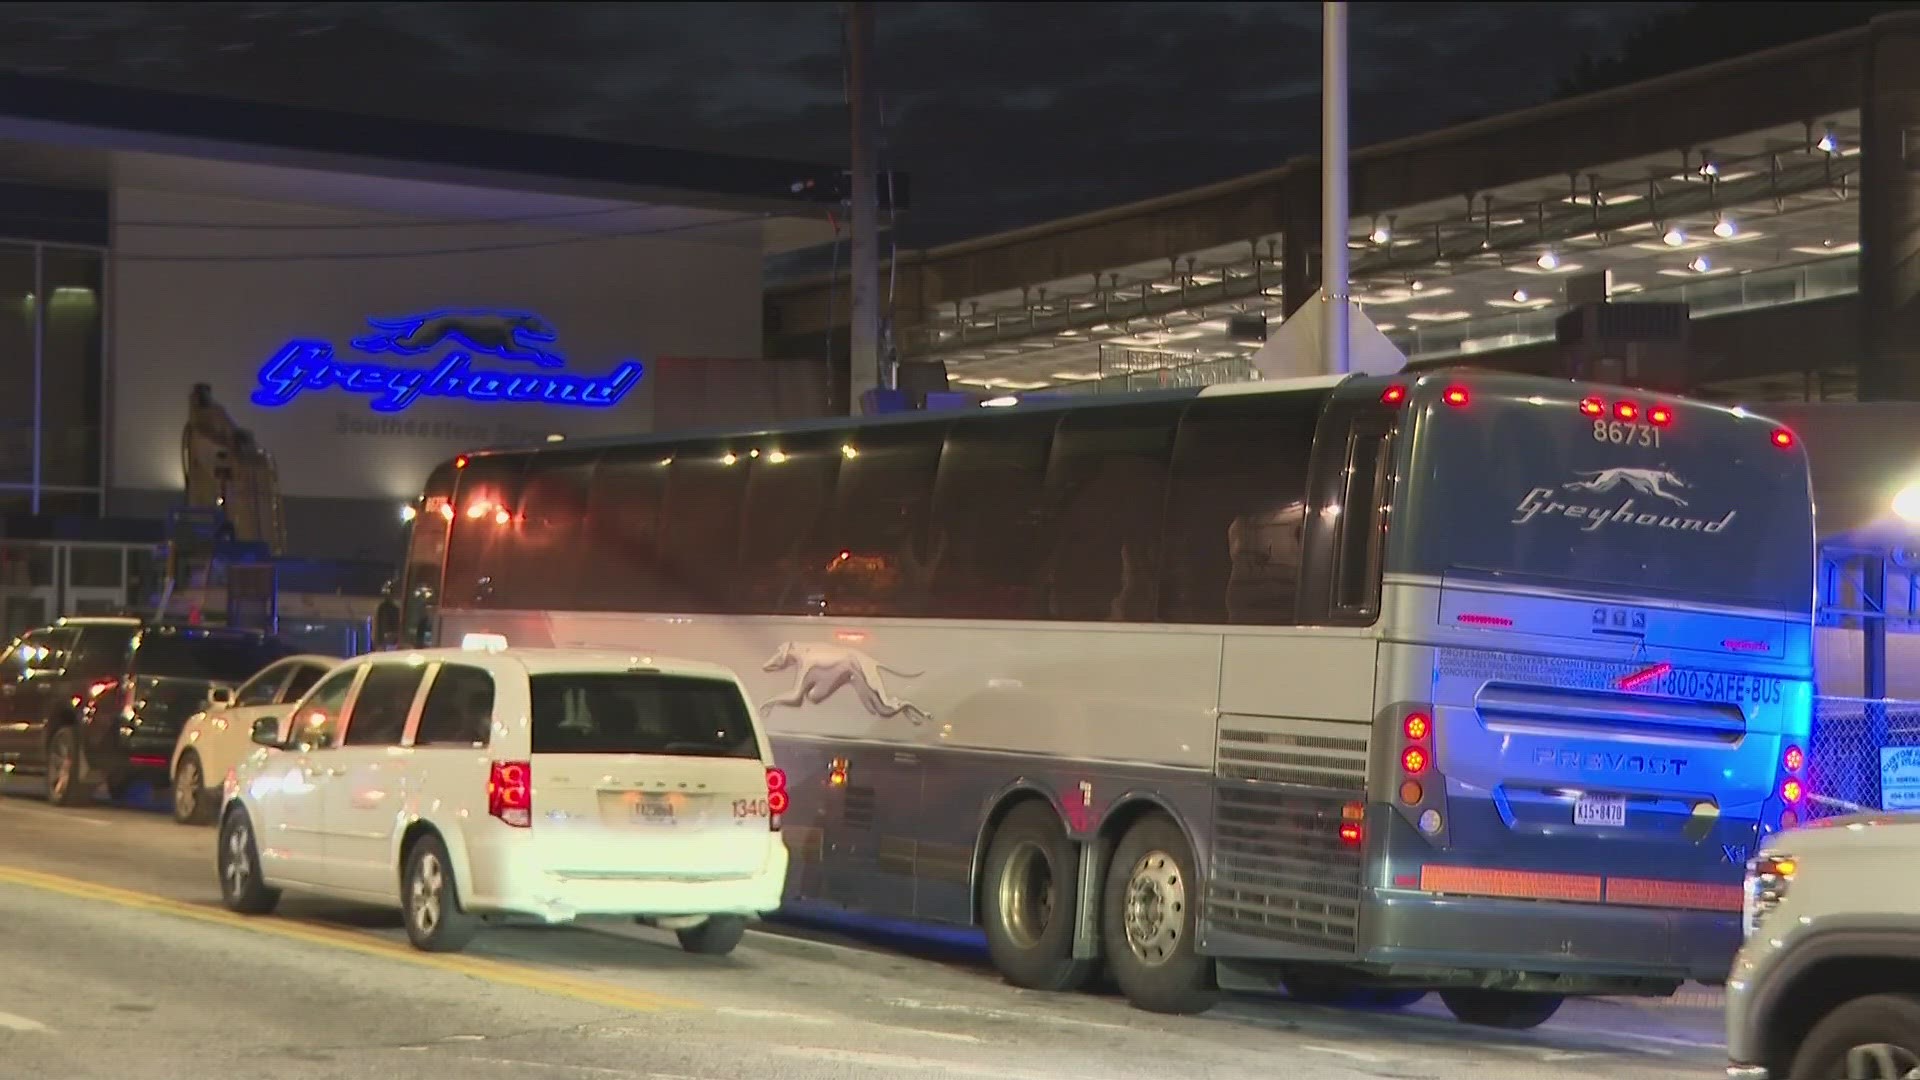 The shooting happened Sunday morning sometime around 4:40 a.m. at bus station near Forsyth and Brotherton Streets.